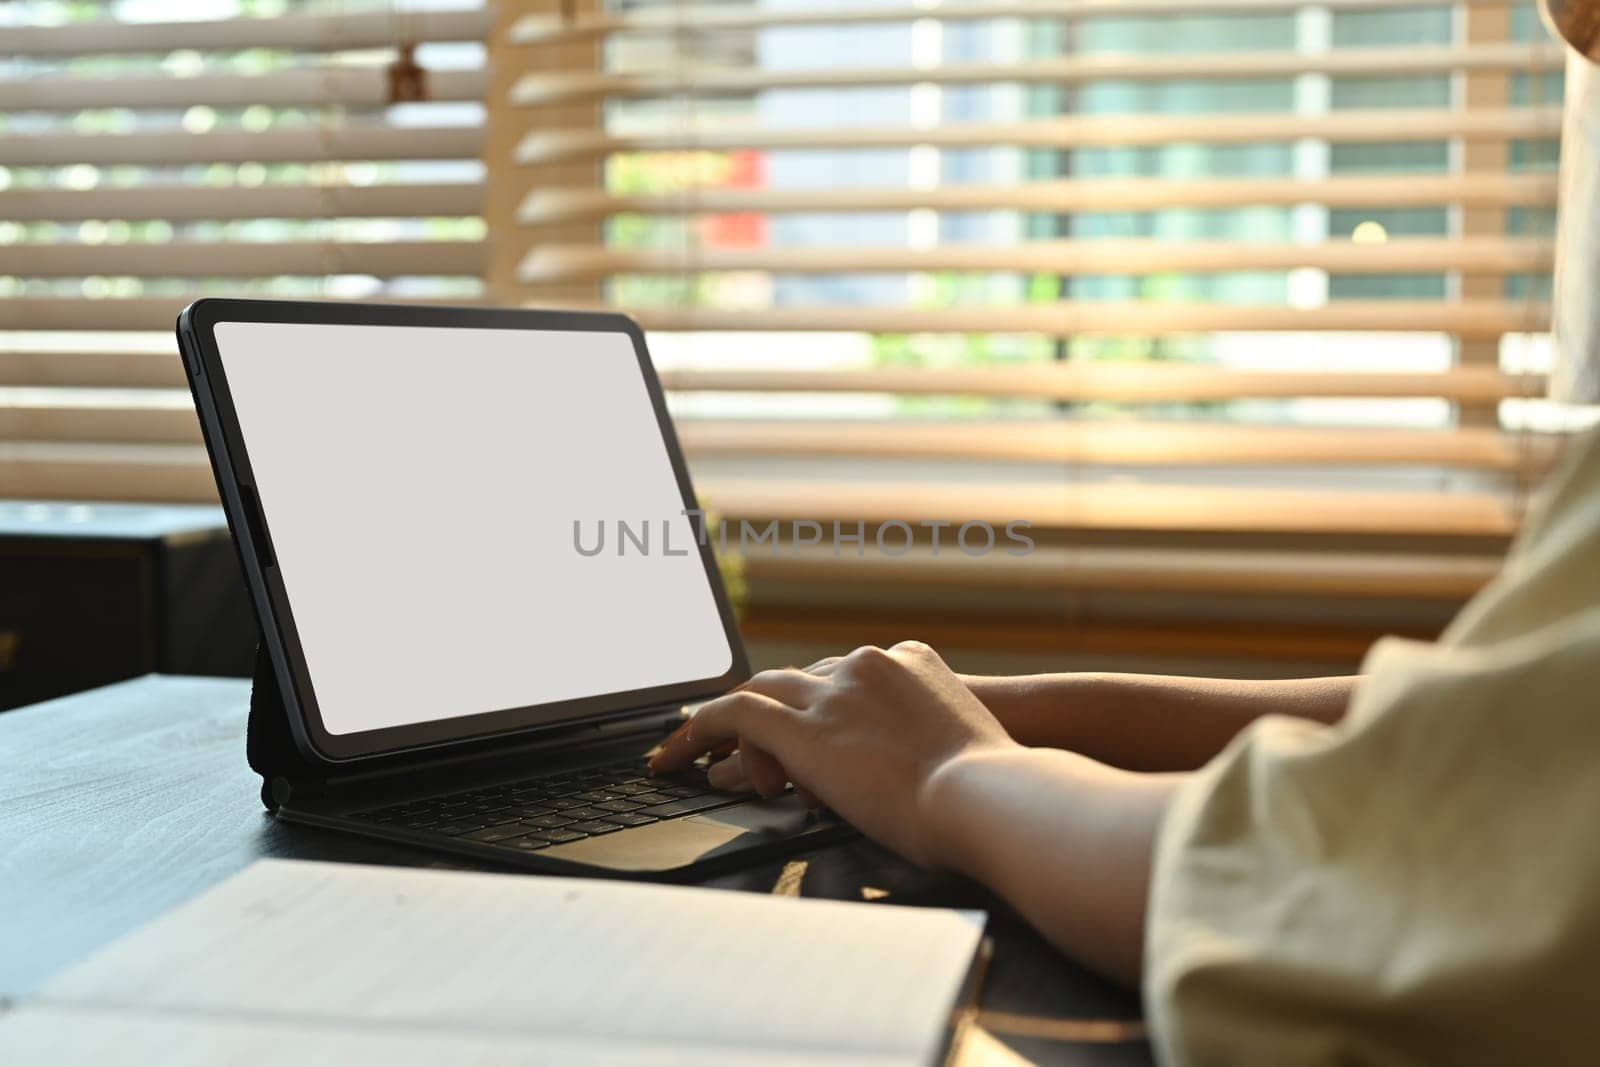 Close up view of woman hands typing on keyboard, studying online classes on digital tablet. Online learning, homeschooling concept.